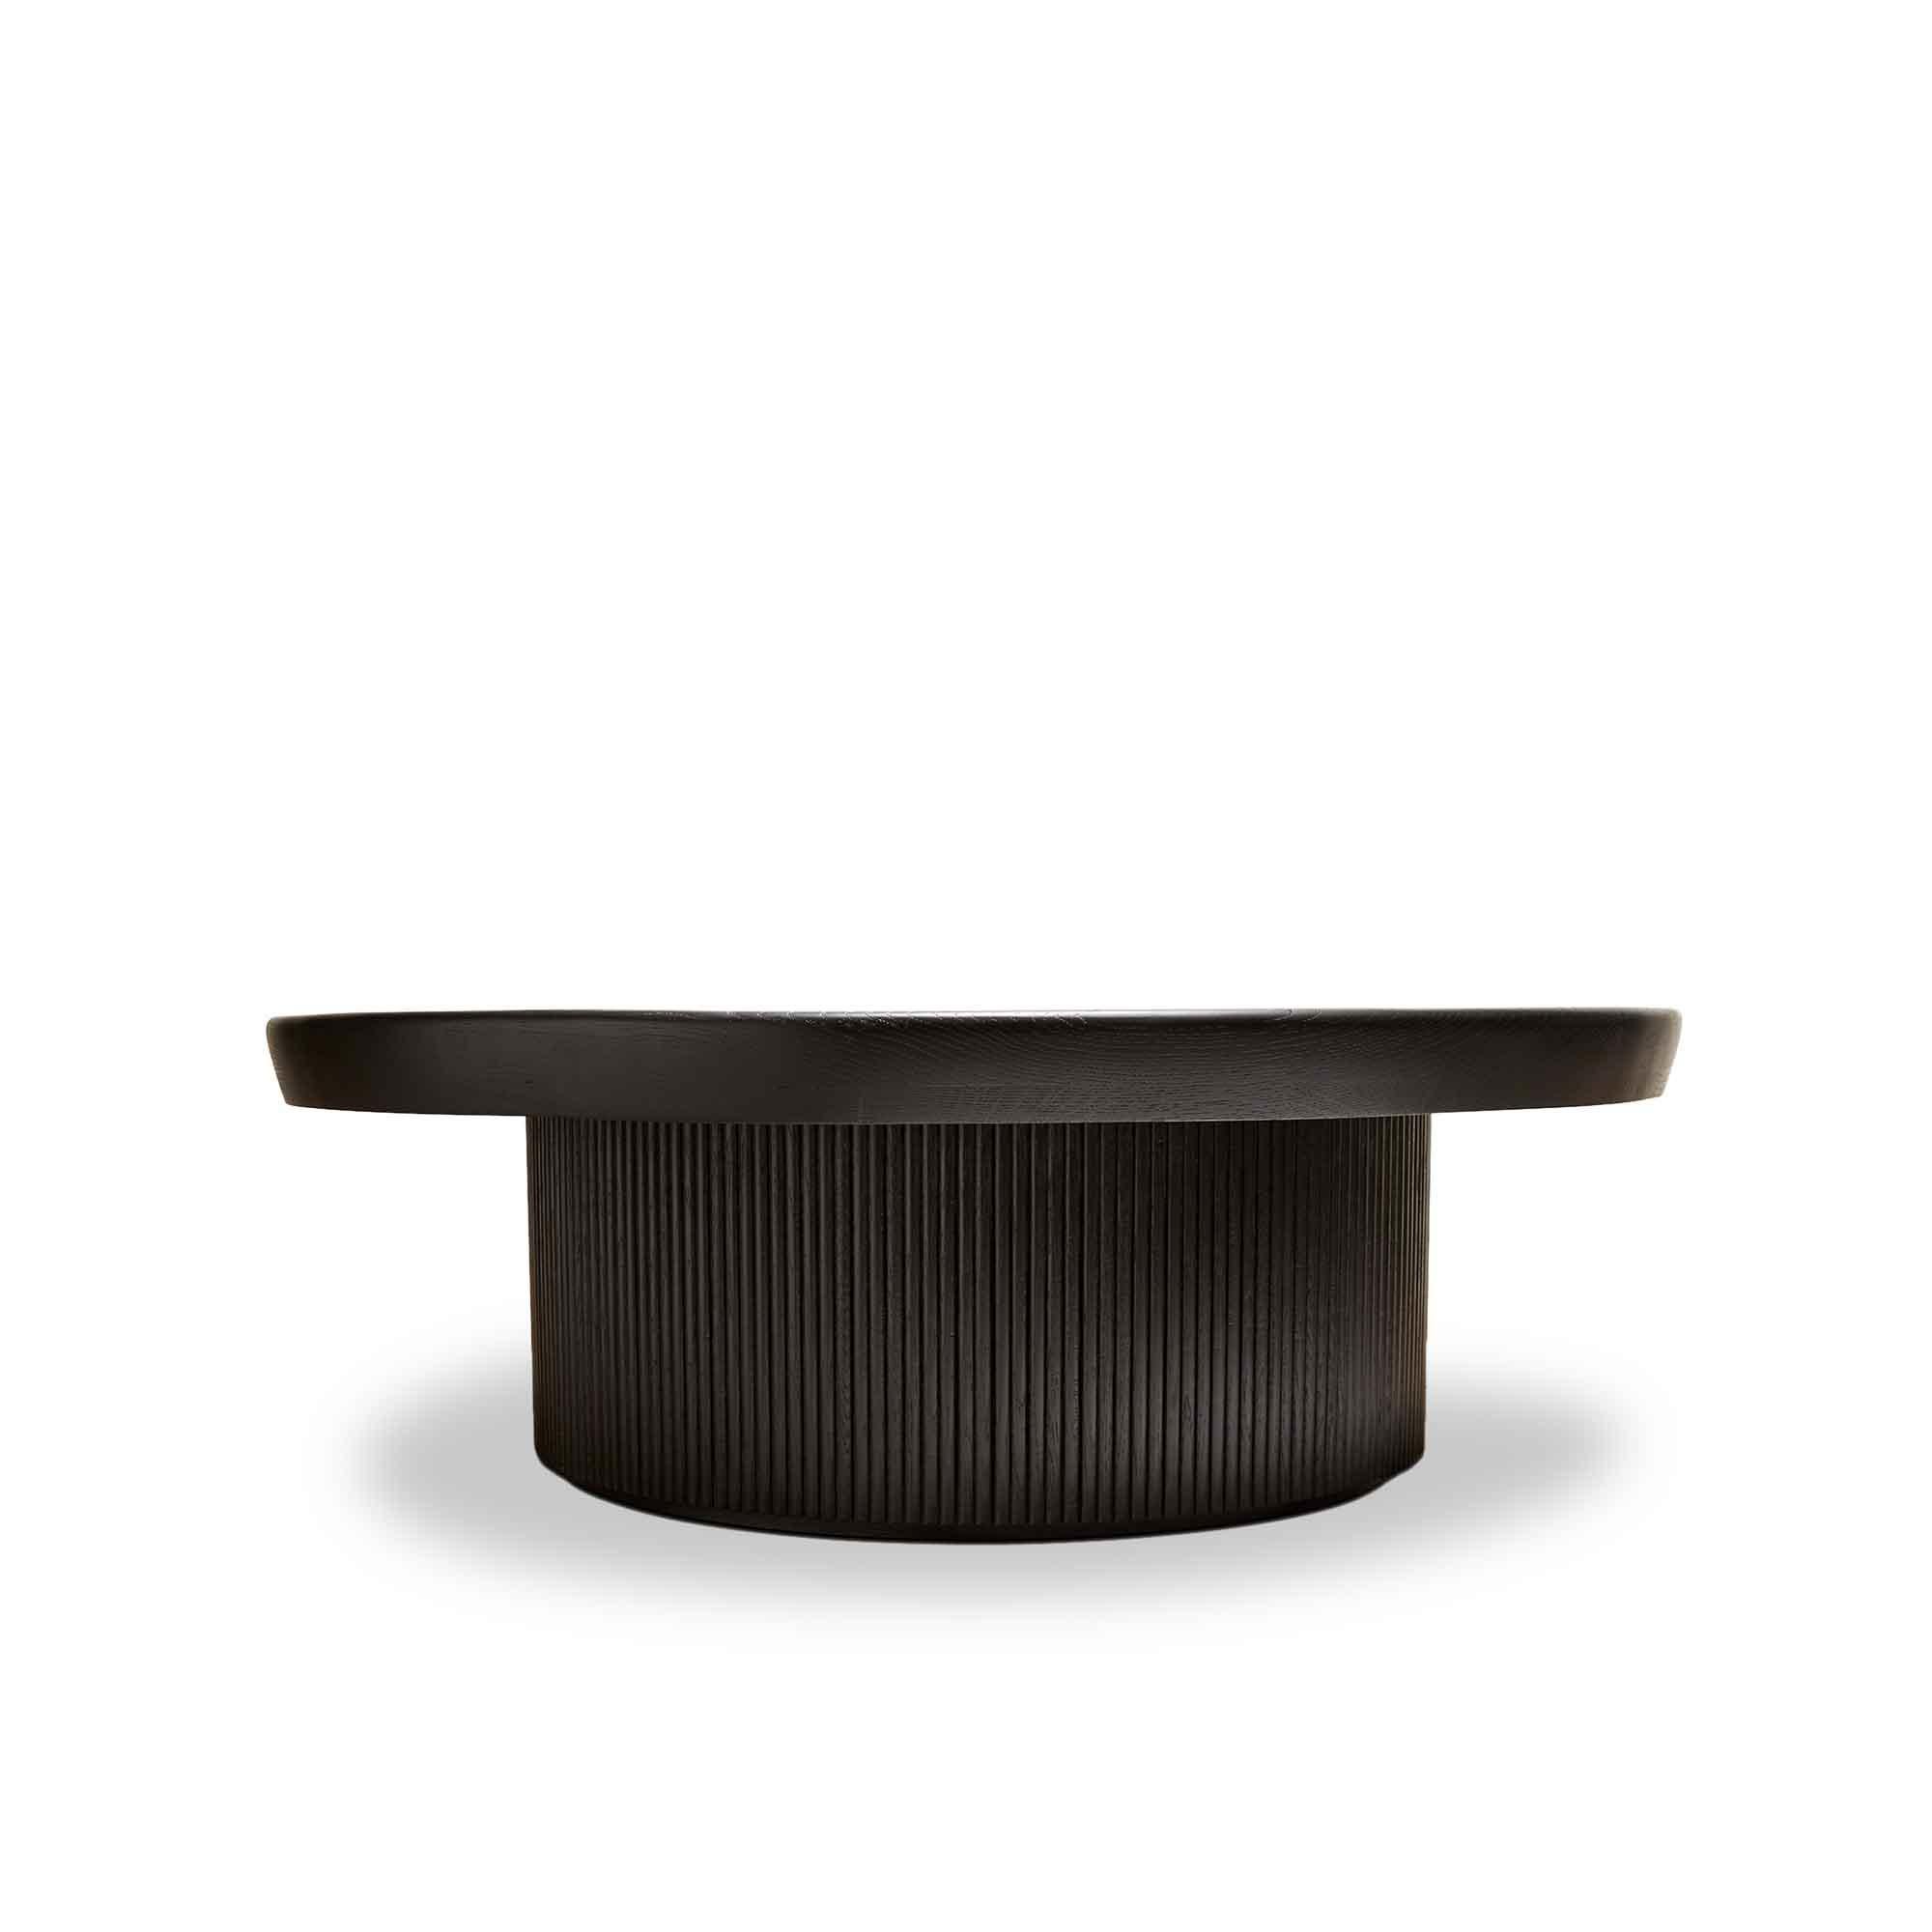 Ebonized Oak Ojai Coffee Table by Lawson-Fenning. The Ojai coffee table features a round top with marquetry and a drum-shaped base with tambour details. Available in American walnut or white oak. 

The Lawson-Fenning Collection is designed and